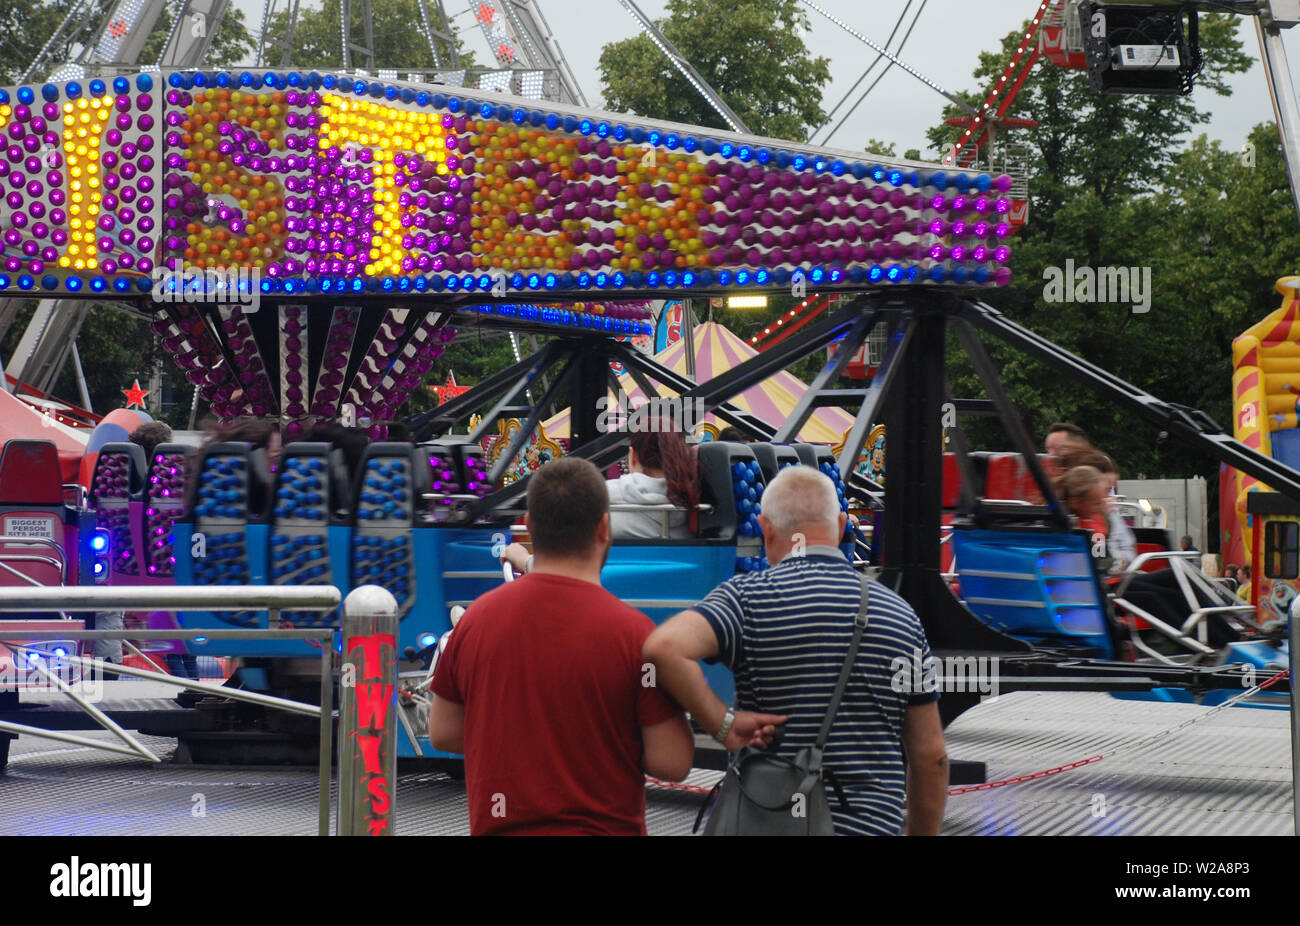 a general view of the funfair at the 2019 Northampton town show Stock Photo